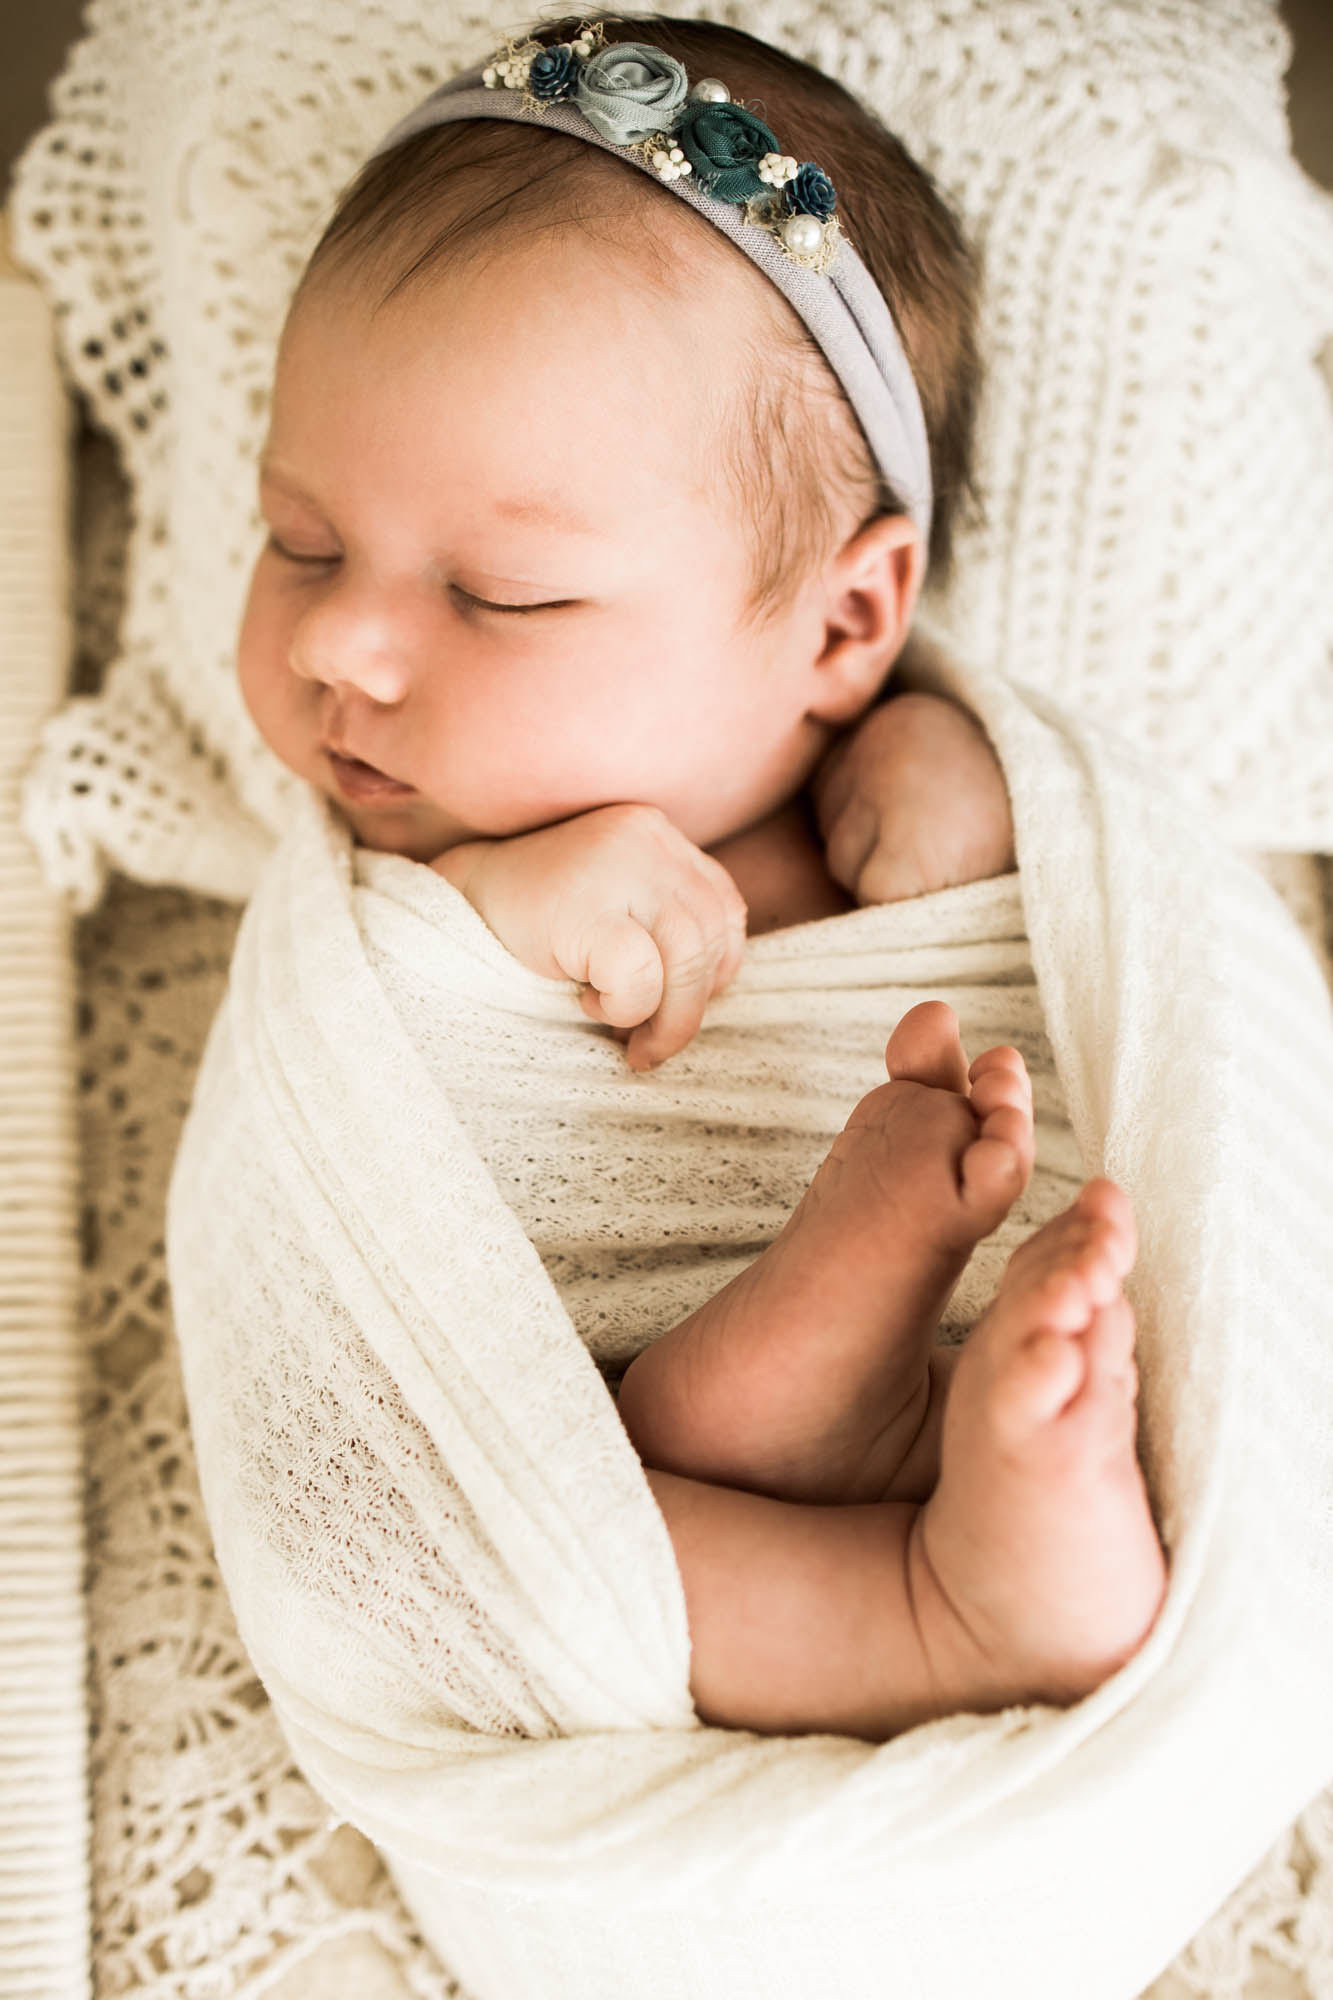 Calgary newborn and maternity photographer, in-home lifestyle photos with a family holding their newborn baby